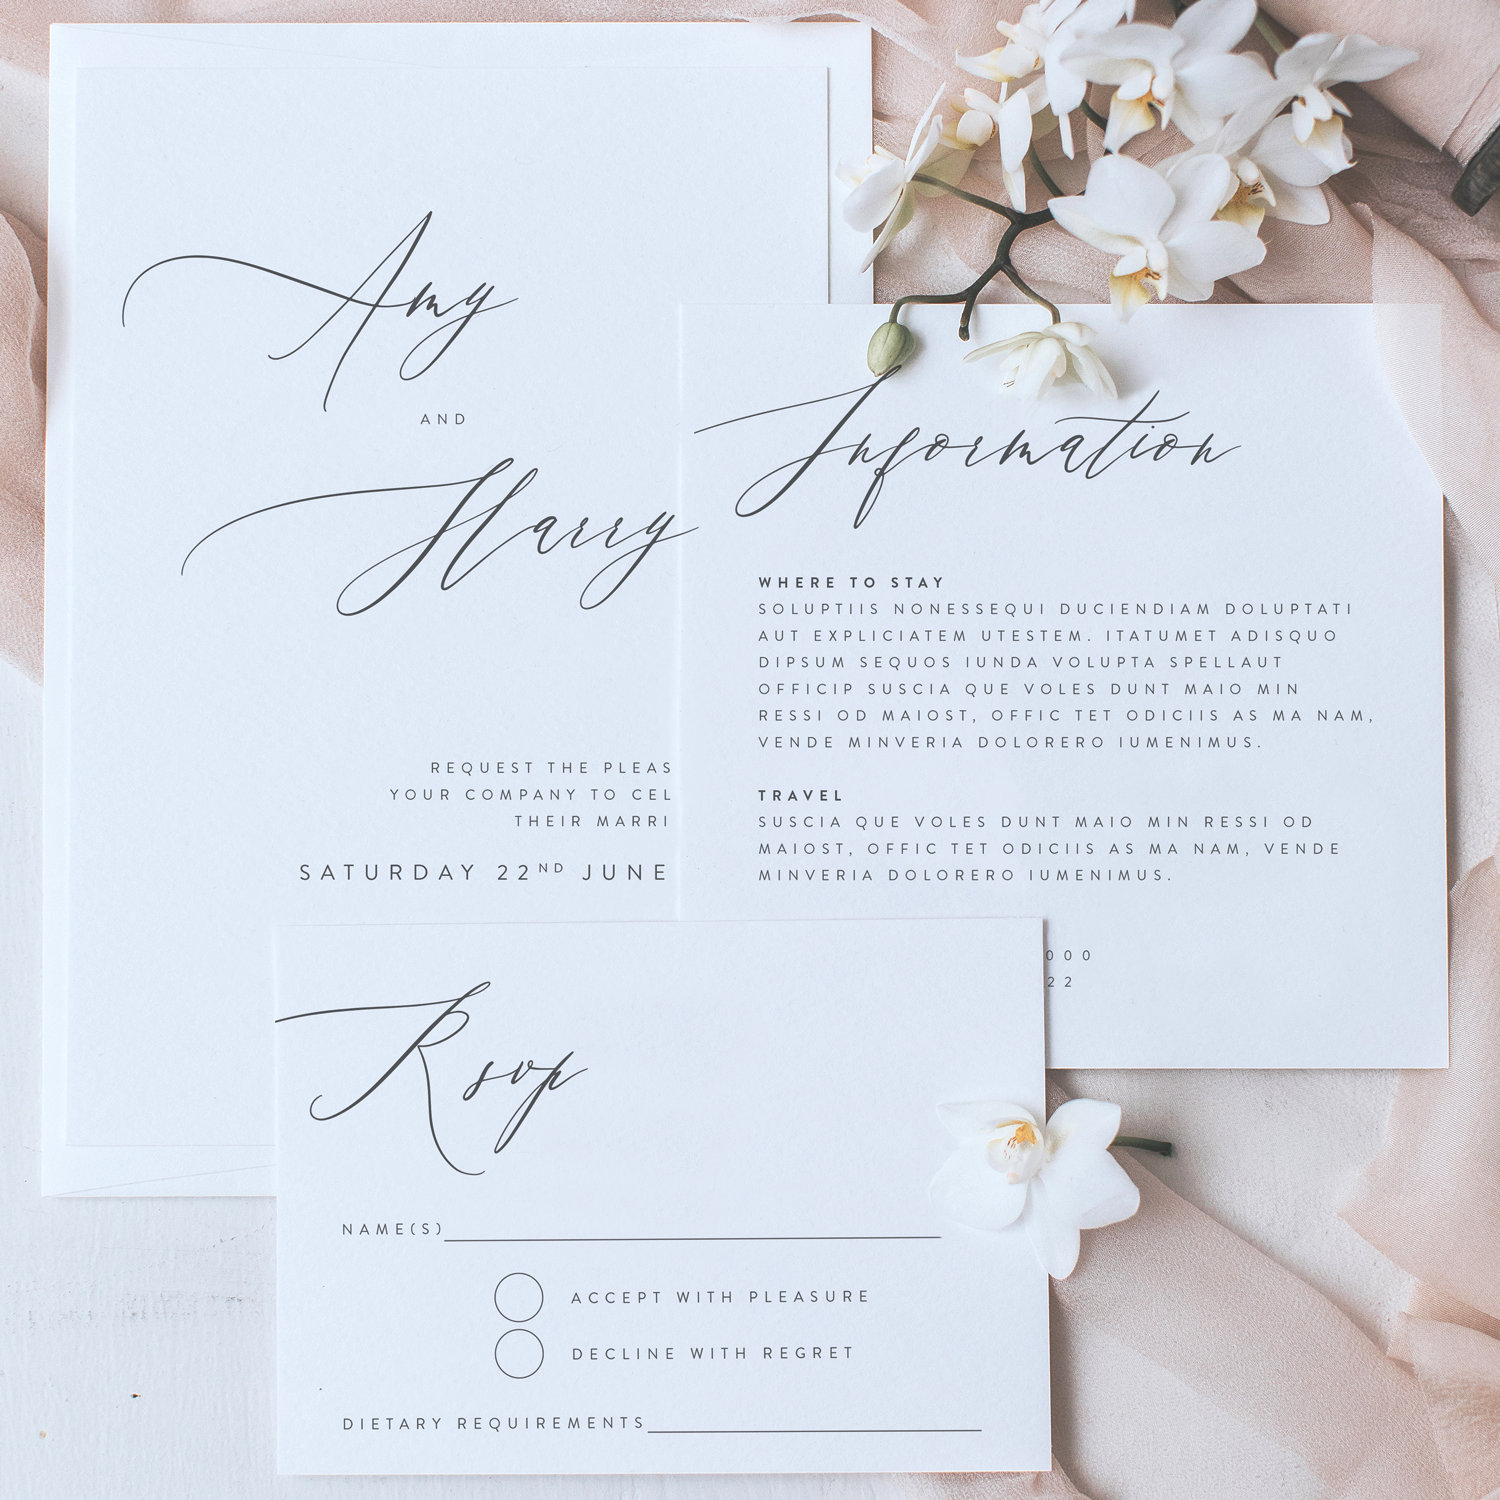 Wedding Invitation Set With Stylish & Classic Fonts - Includes Invitation, Information Card, Rsvp Envelope Printed